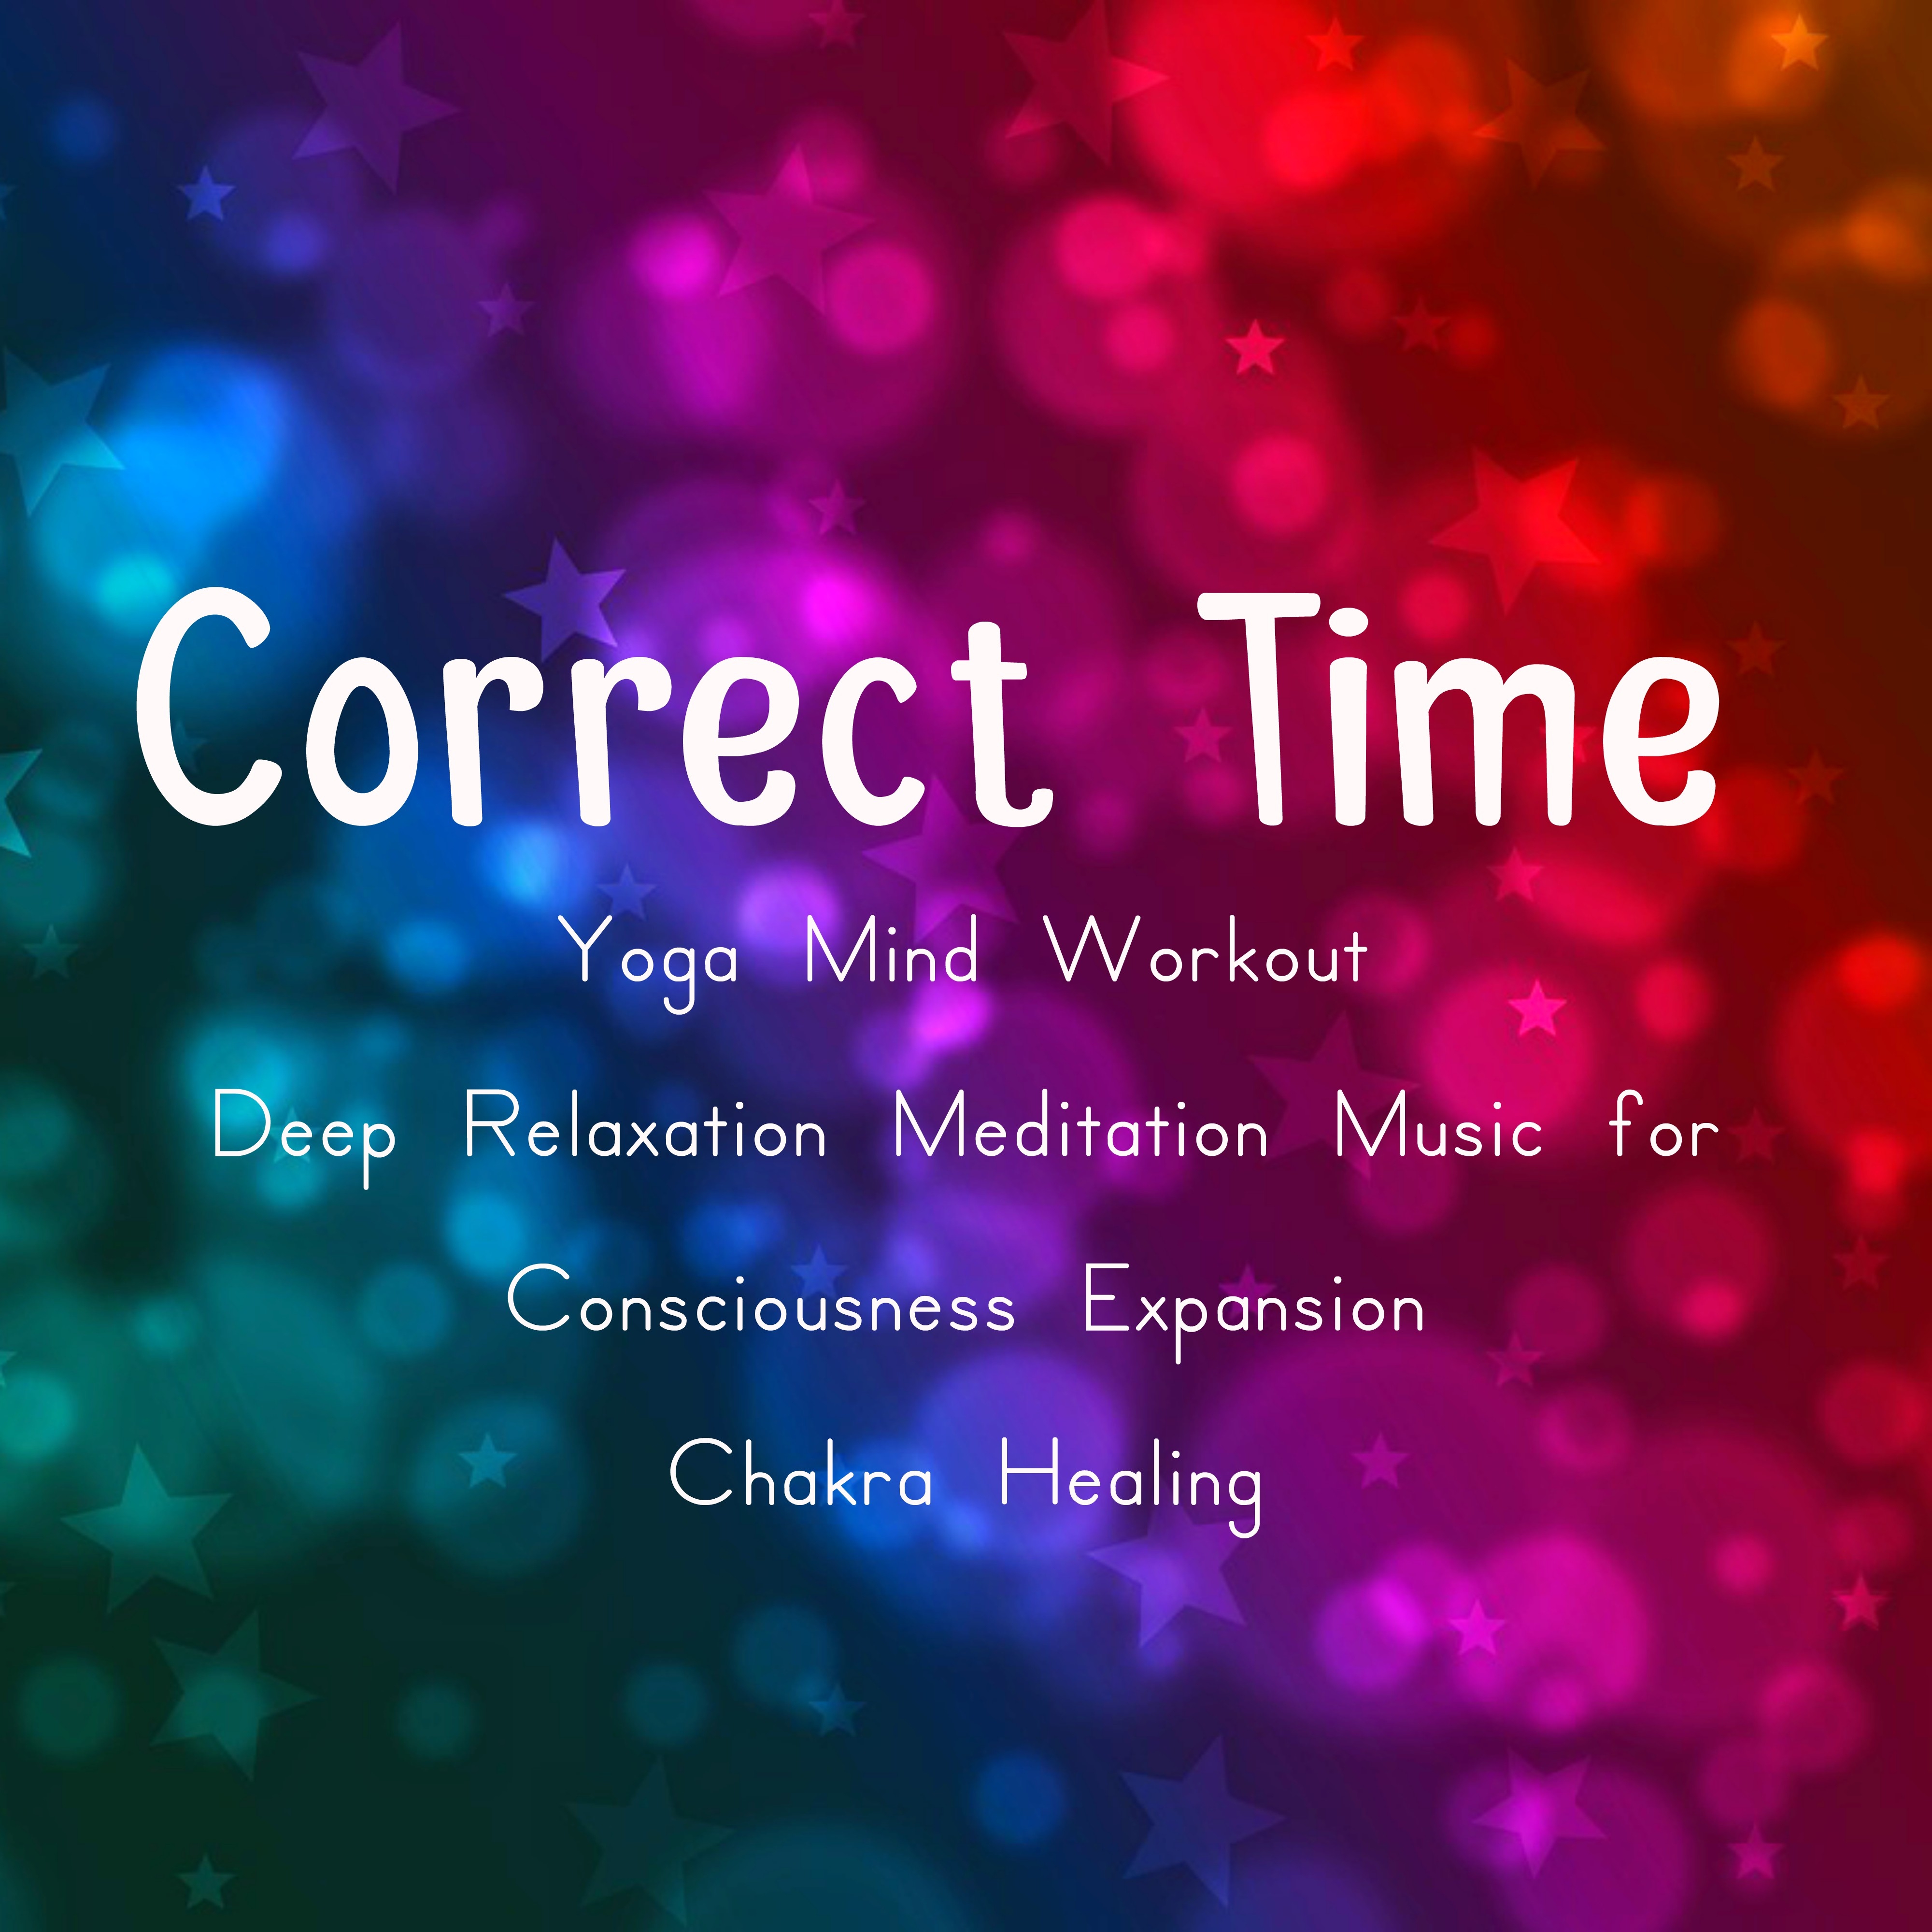 Correct Time - Yoga Mind Workout Deep Relaxation Meditation Music for Consciousness Expansion Chakra Healing with Sleep Soothing Sounds of Nature